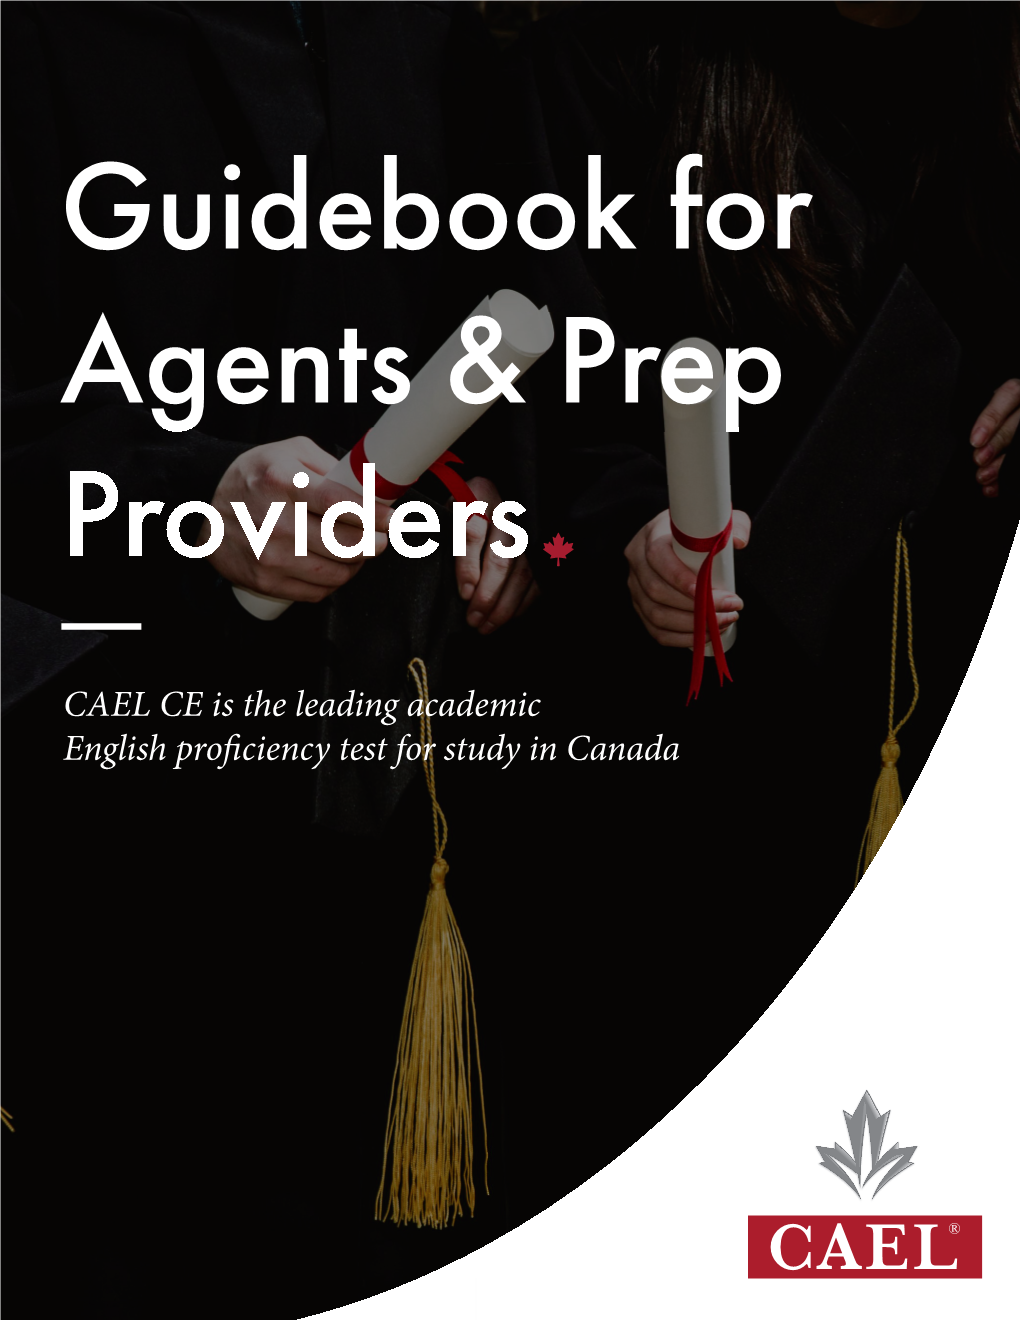 Guidebook for Agents & Prep Providers